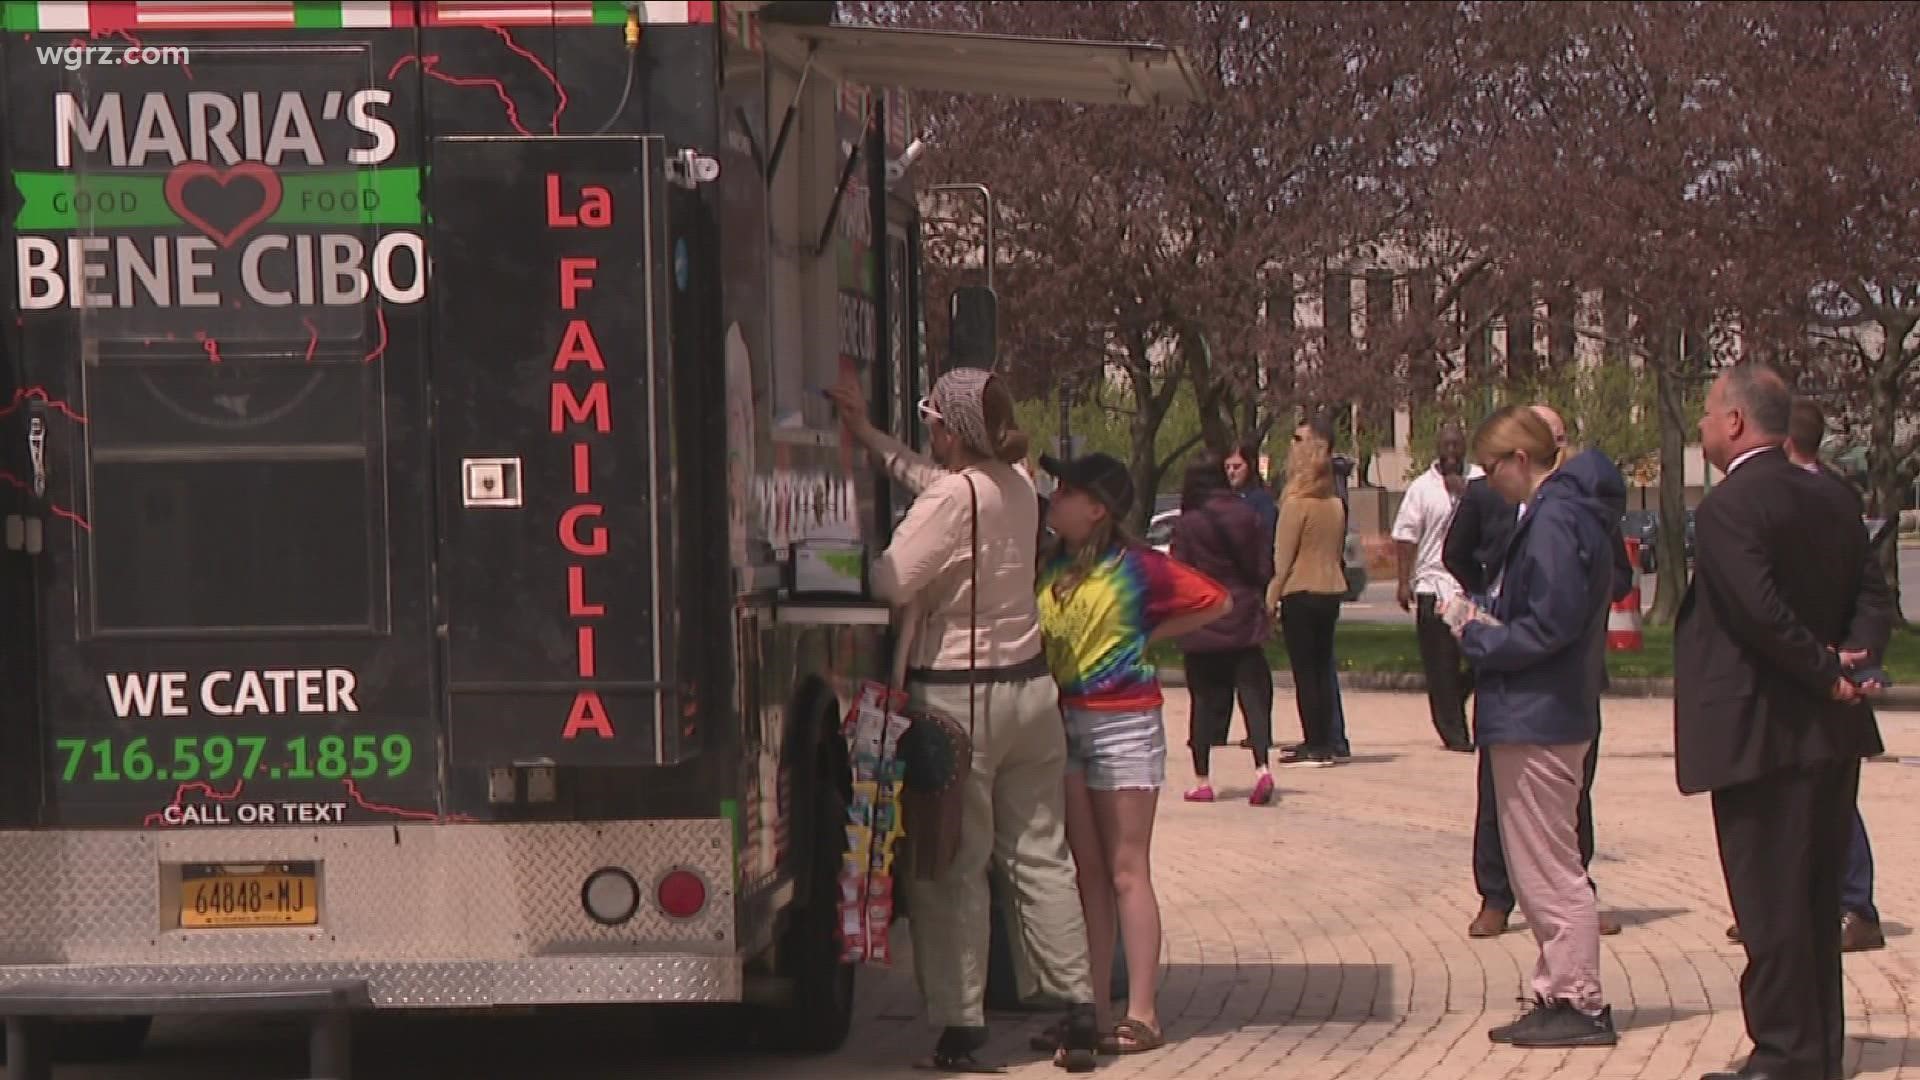 Mayor Byron Brown and other city officials were there for the first day, as 20 food trucks lined up from 11 a.m. to 2:30 p.m. in Niagara Square.